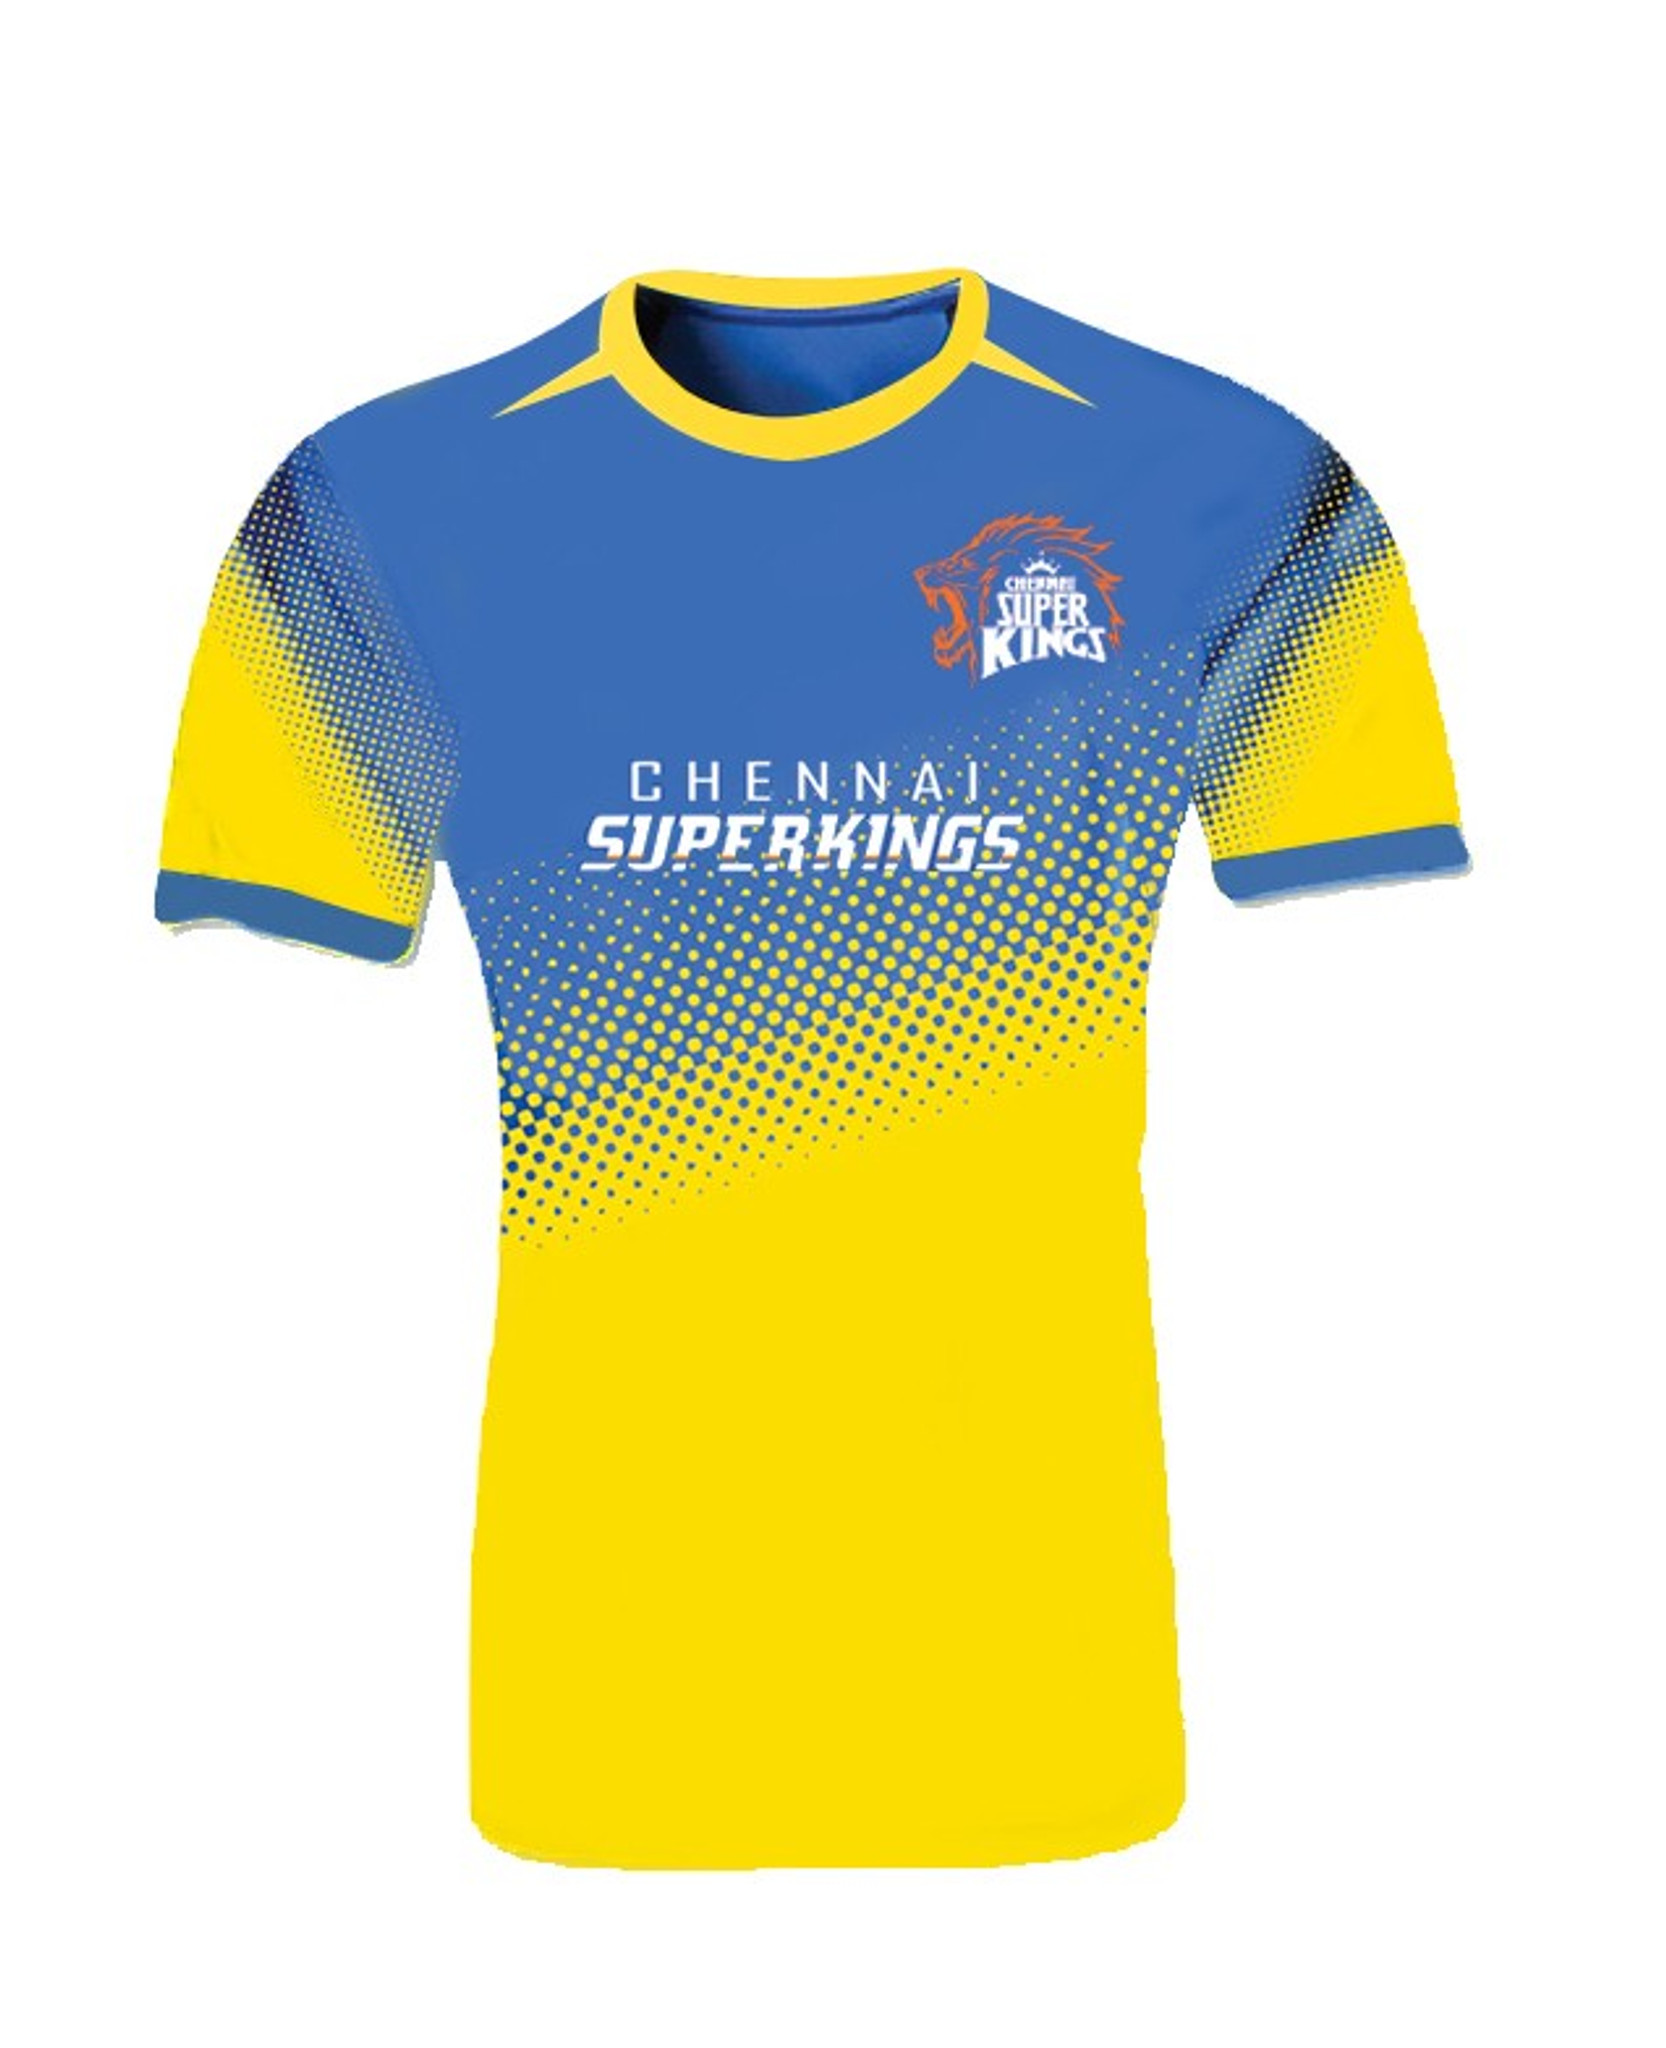 csk jersey number